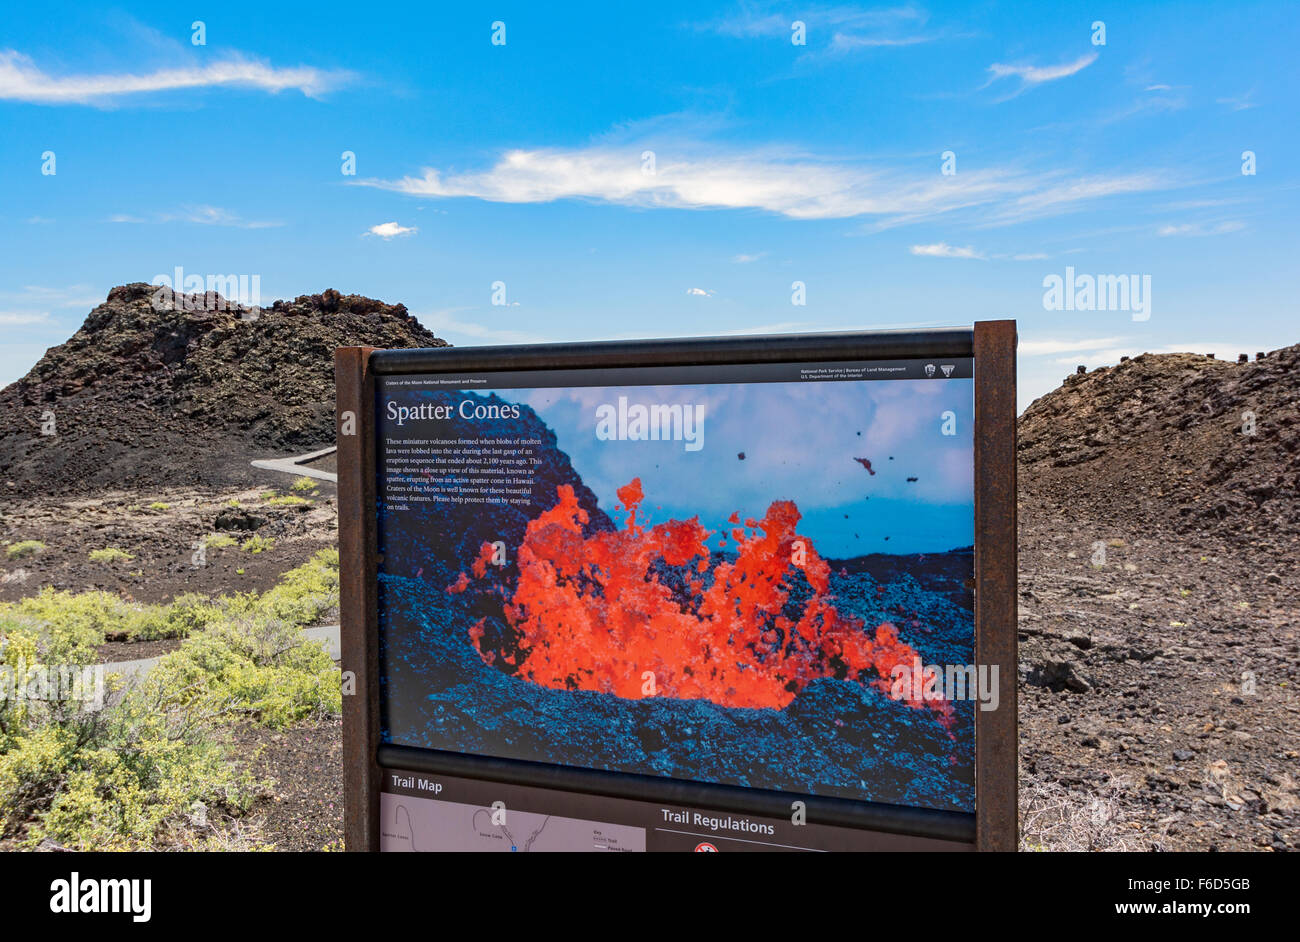 Idaho, Craters of the Moon National Monument and Preserve, Spatter Cones, information sign Stock Photo